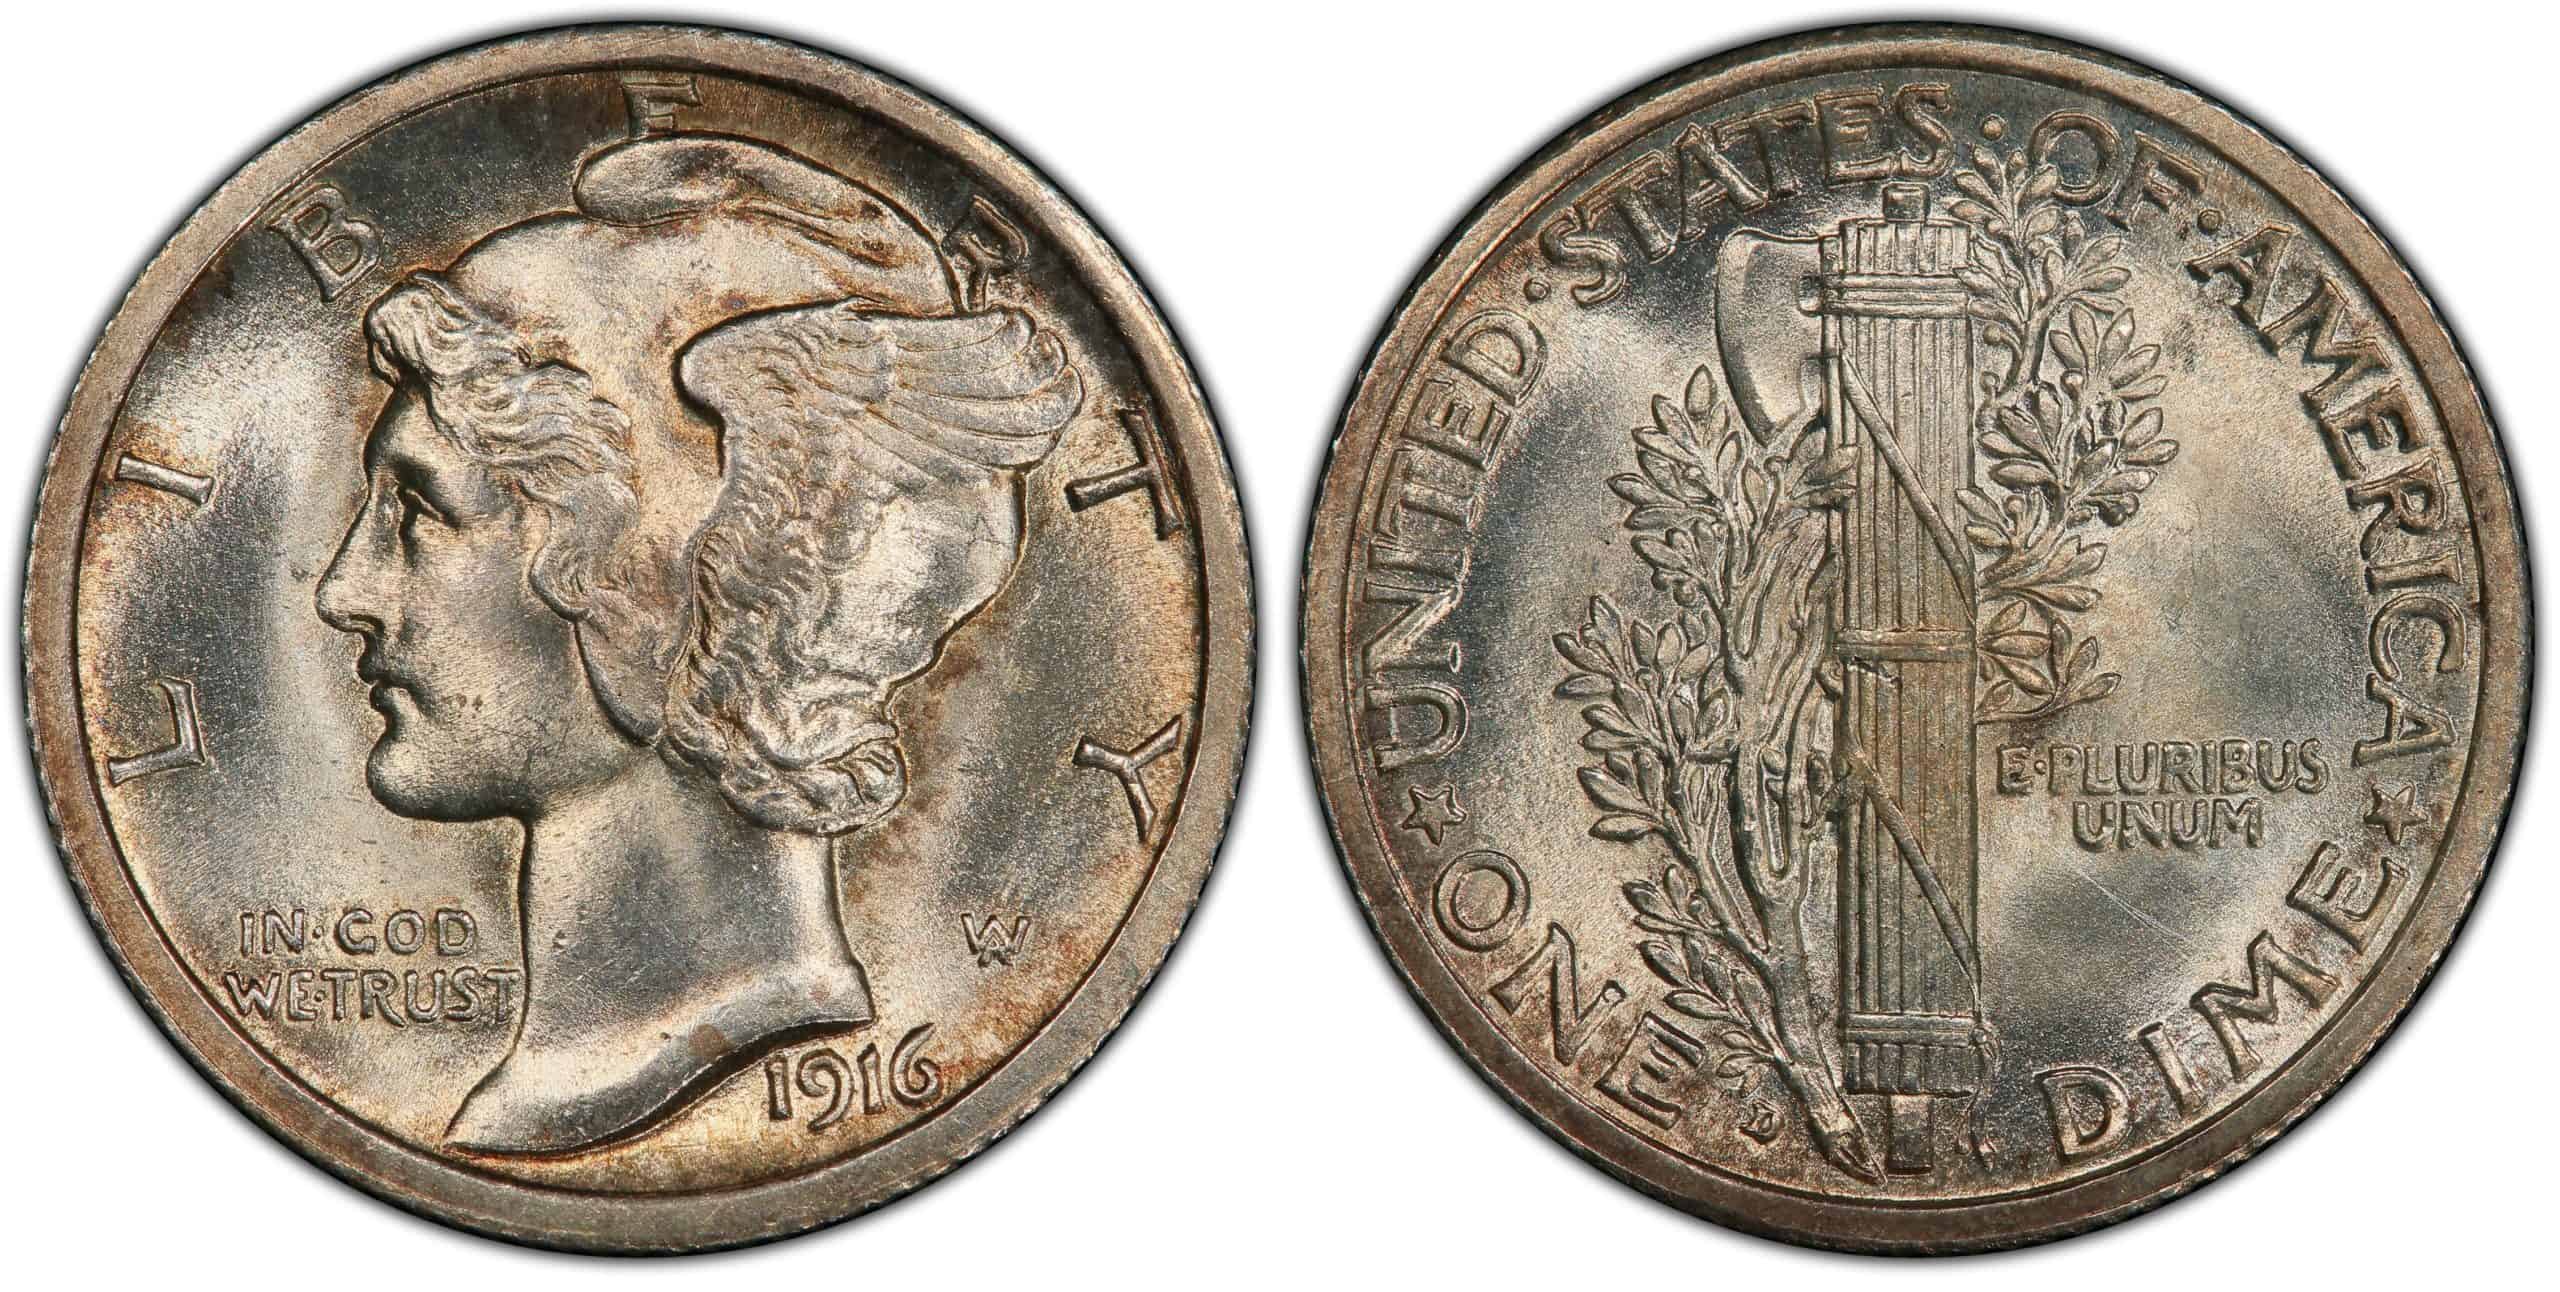 What is the 1940 Dime